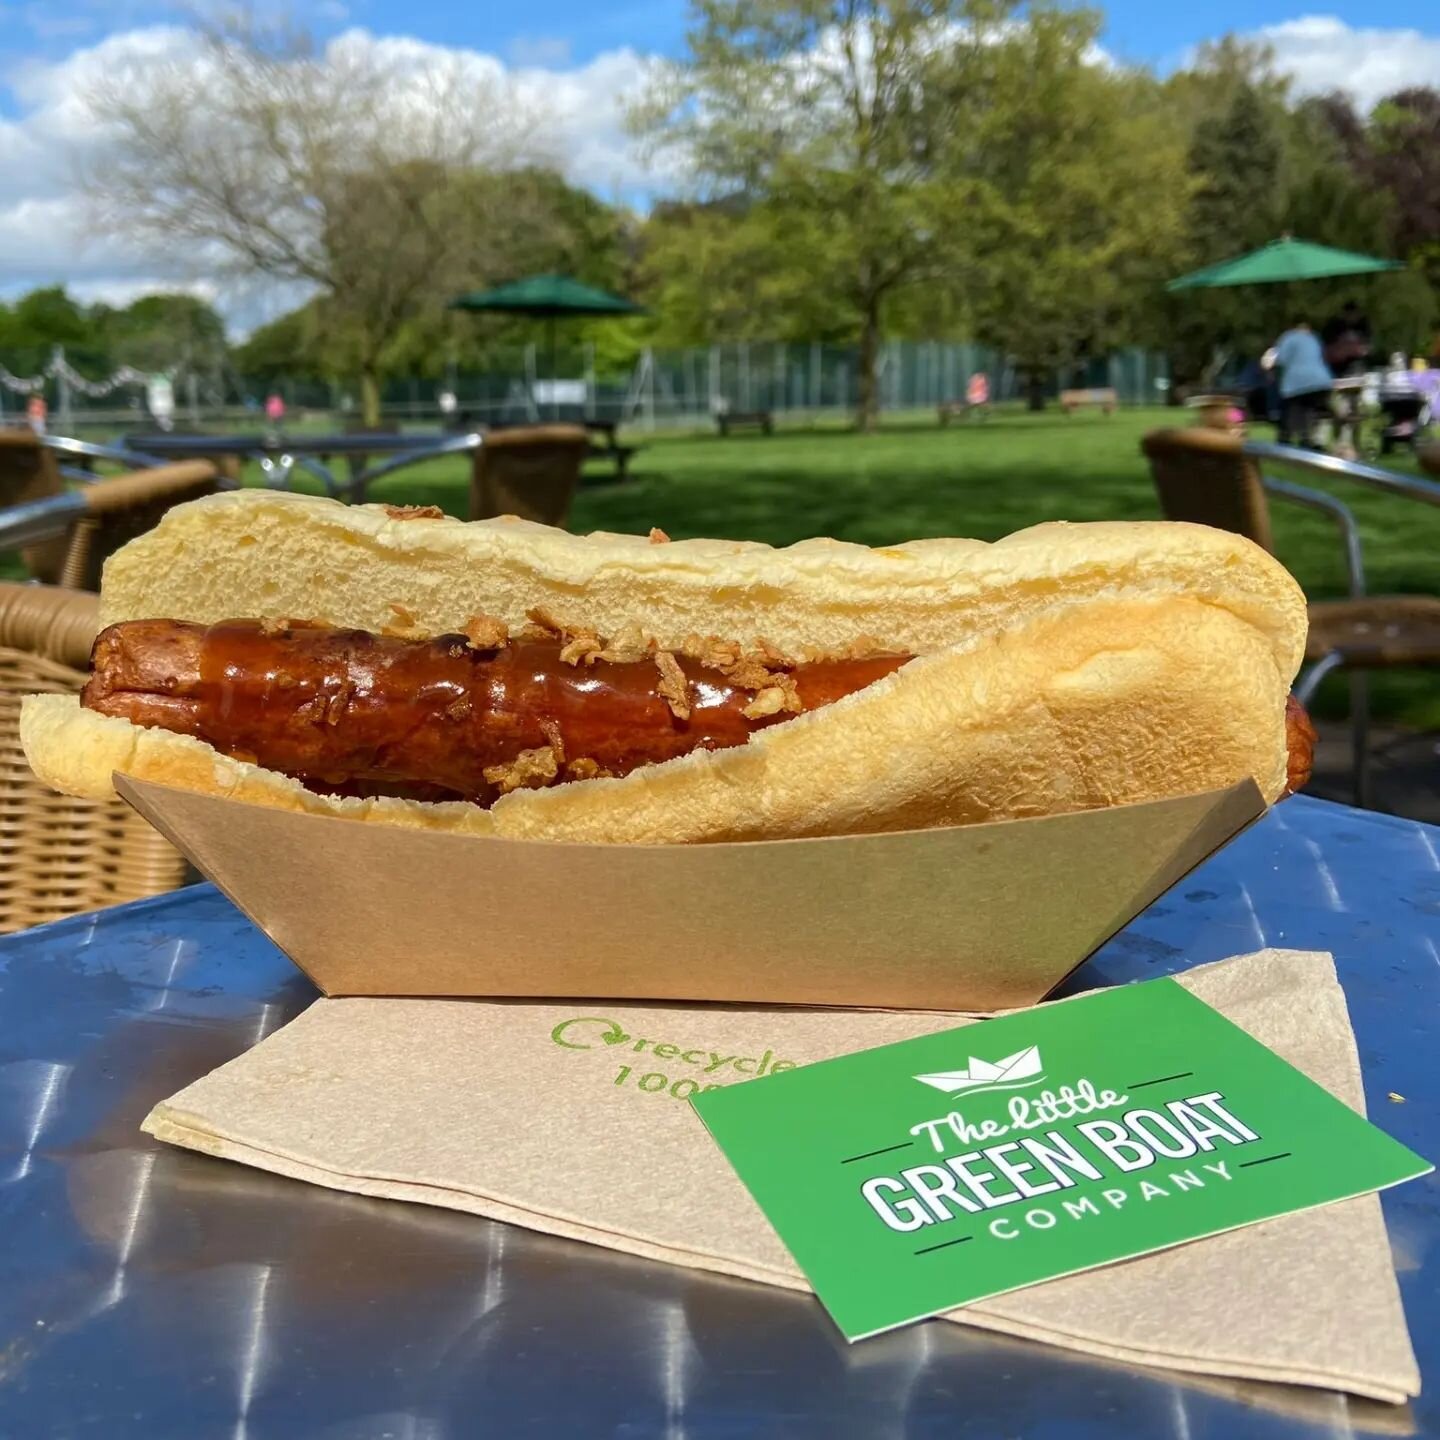 Our new hotdogs are available from our cafe in Lammas Park in Staines-Upon-Thames!

#littlegreenboatcompany #surreycafe #surreydaysout #surrey #cafenearby #cafenearlondon #caf&eacute;s